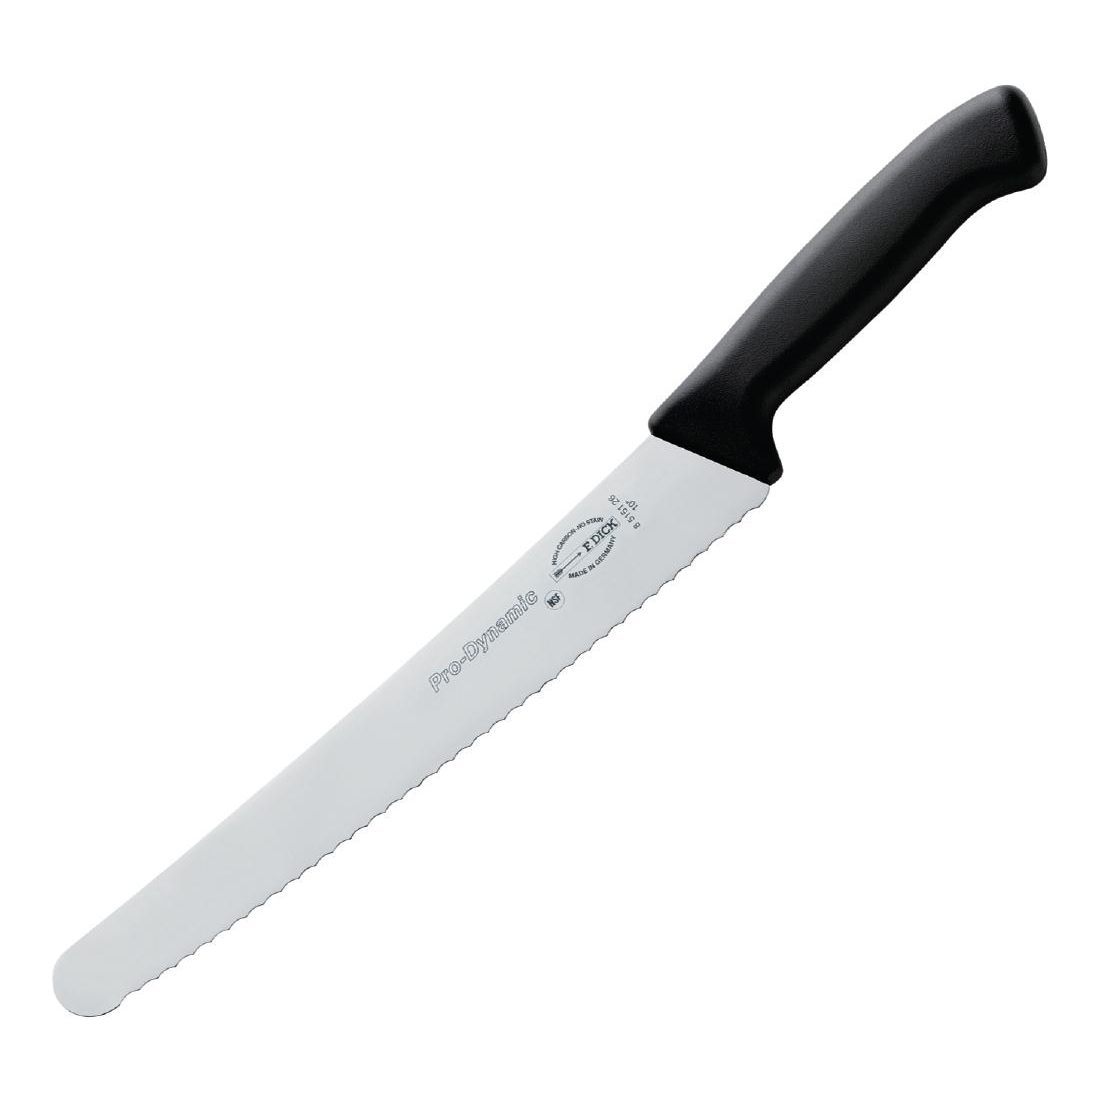 Dick Pro Dynamic HACCP Serrated Pastry Knife Black 25.5cm